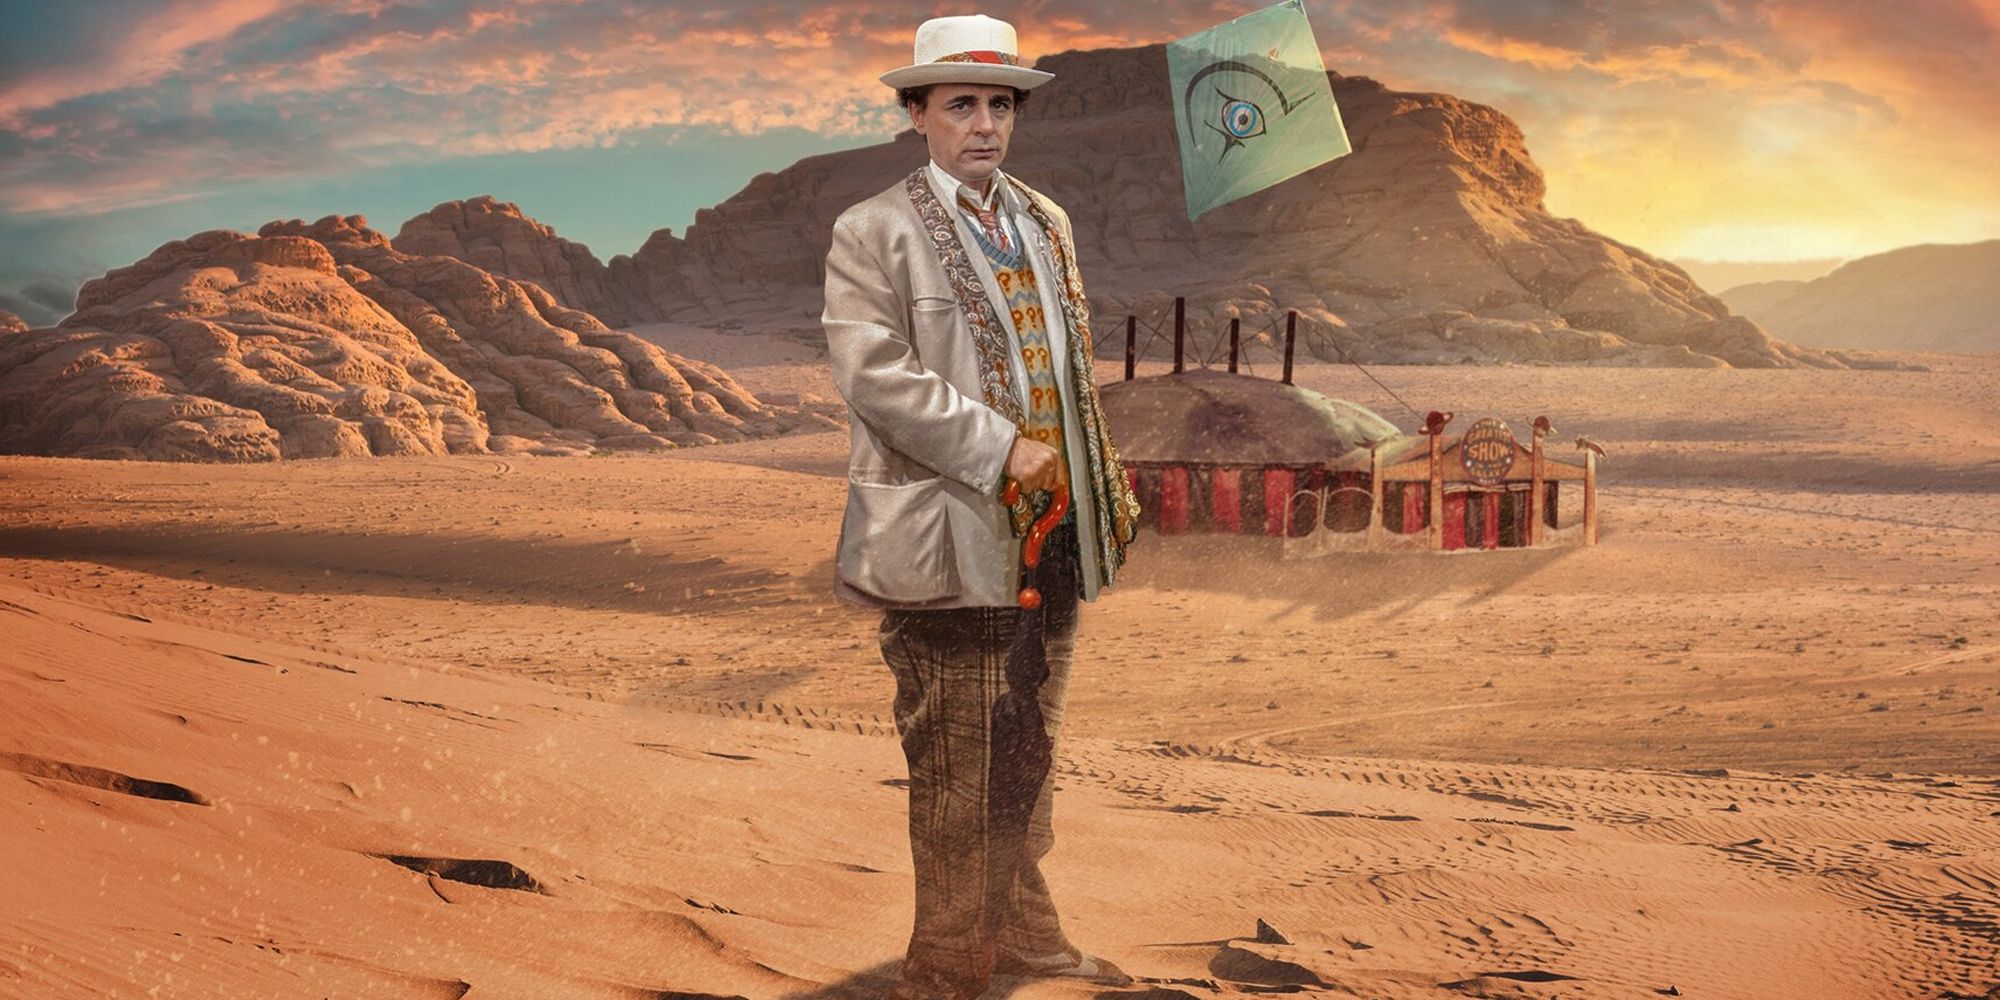 Seventh Doctor standing on a desert planet in front of a carnival